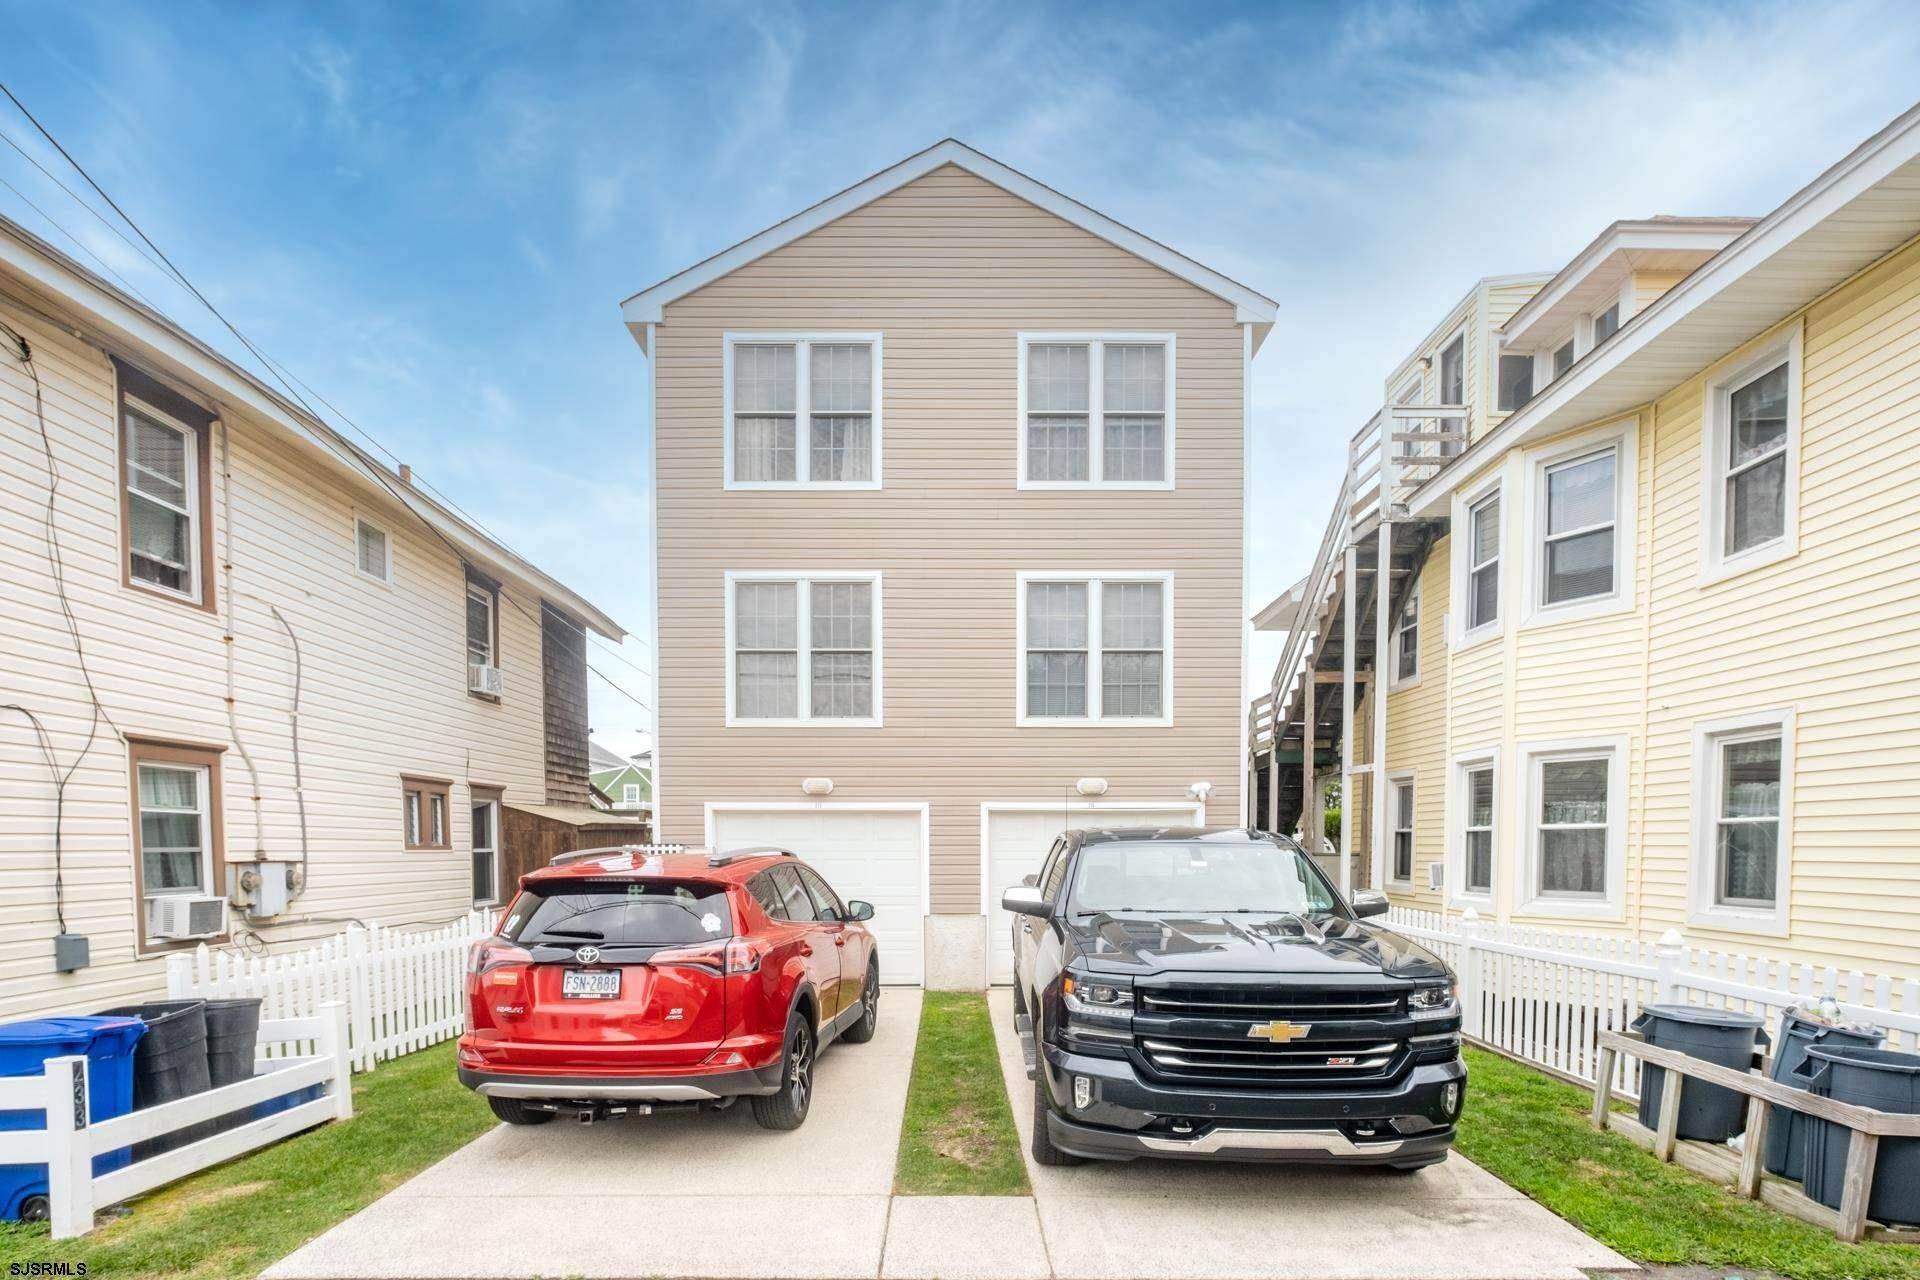 23. Condominiums at 235 Asbury Ave Ave Ocean City/Northend Ocean City, New Jersey 08226 United States